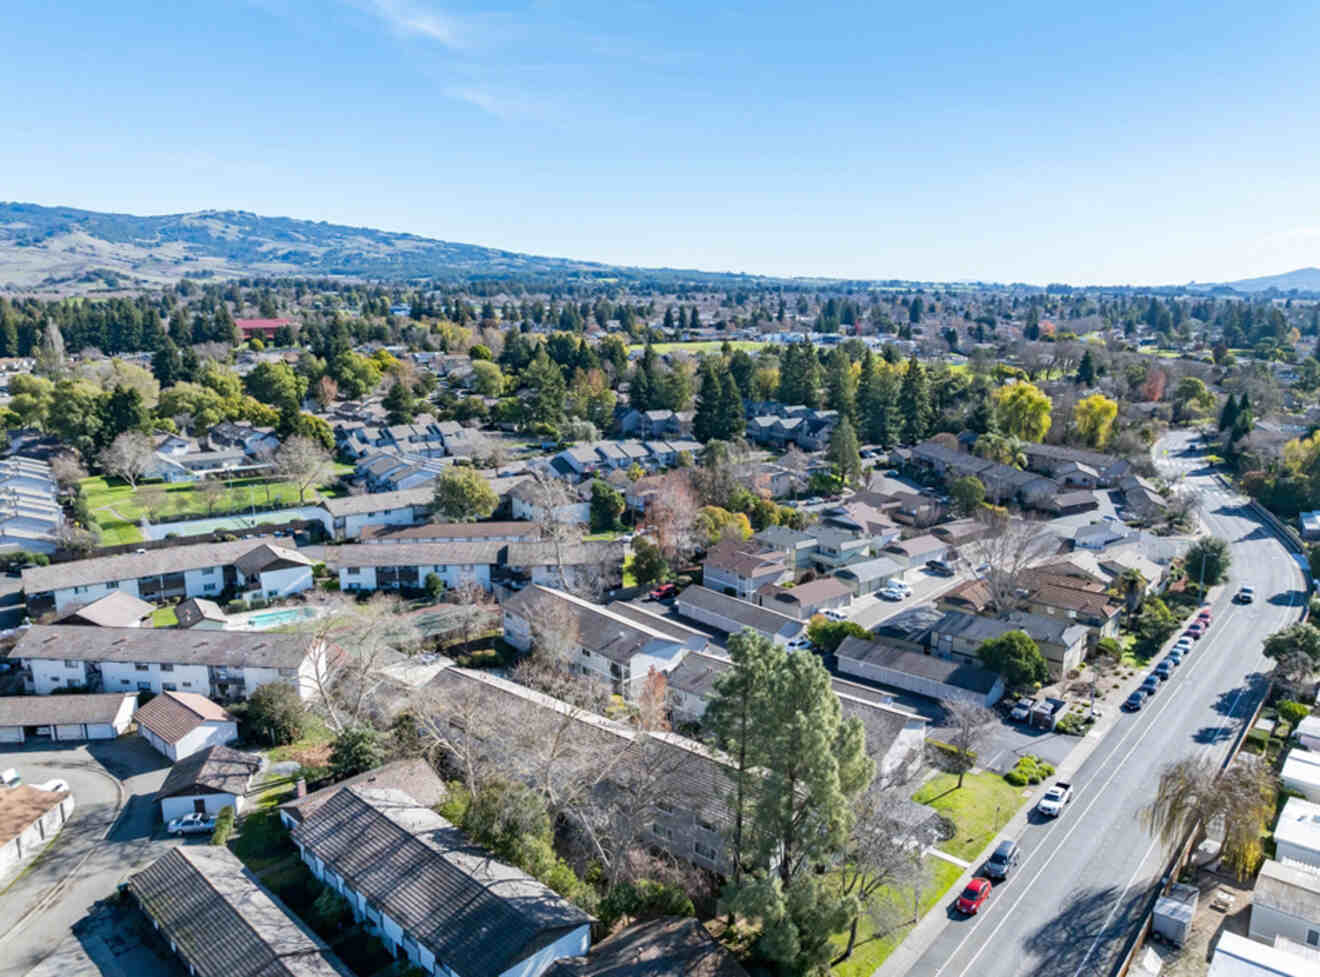 An aerial view of residential houses in Rohnert Park, with a backdrop of hills and a mix of trees.